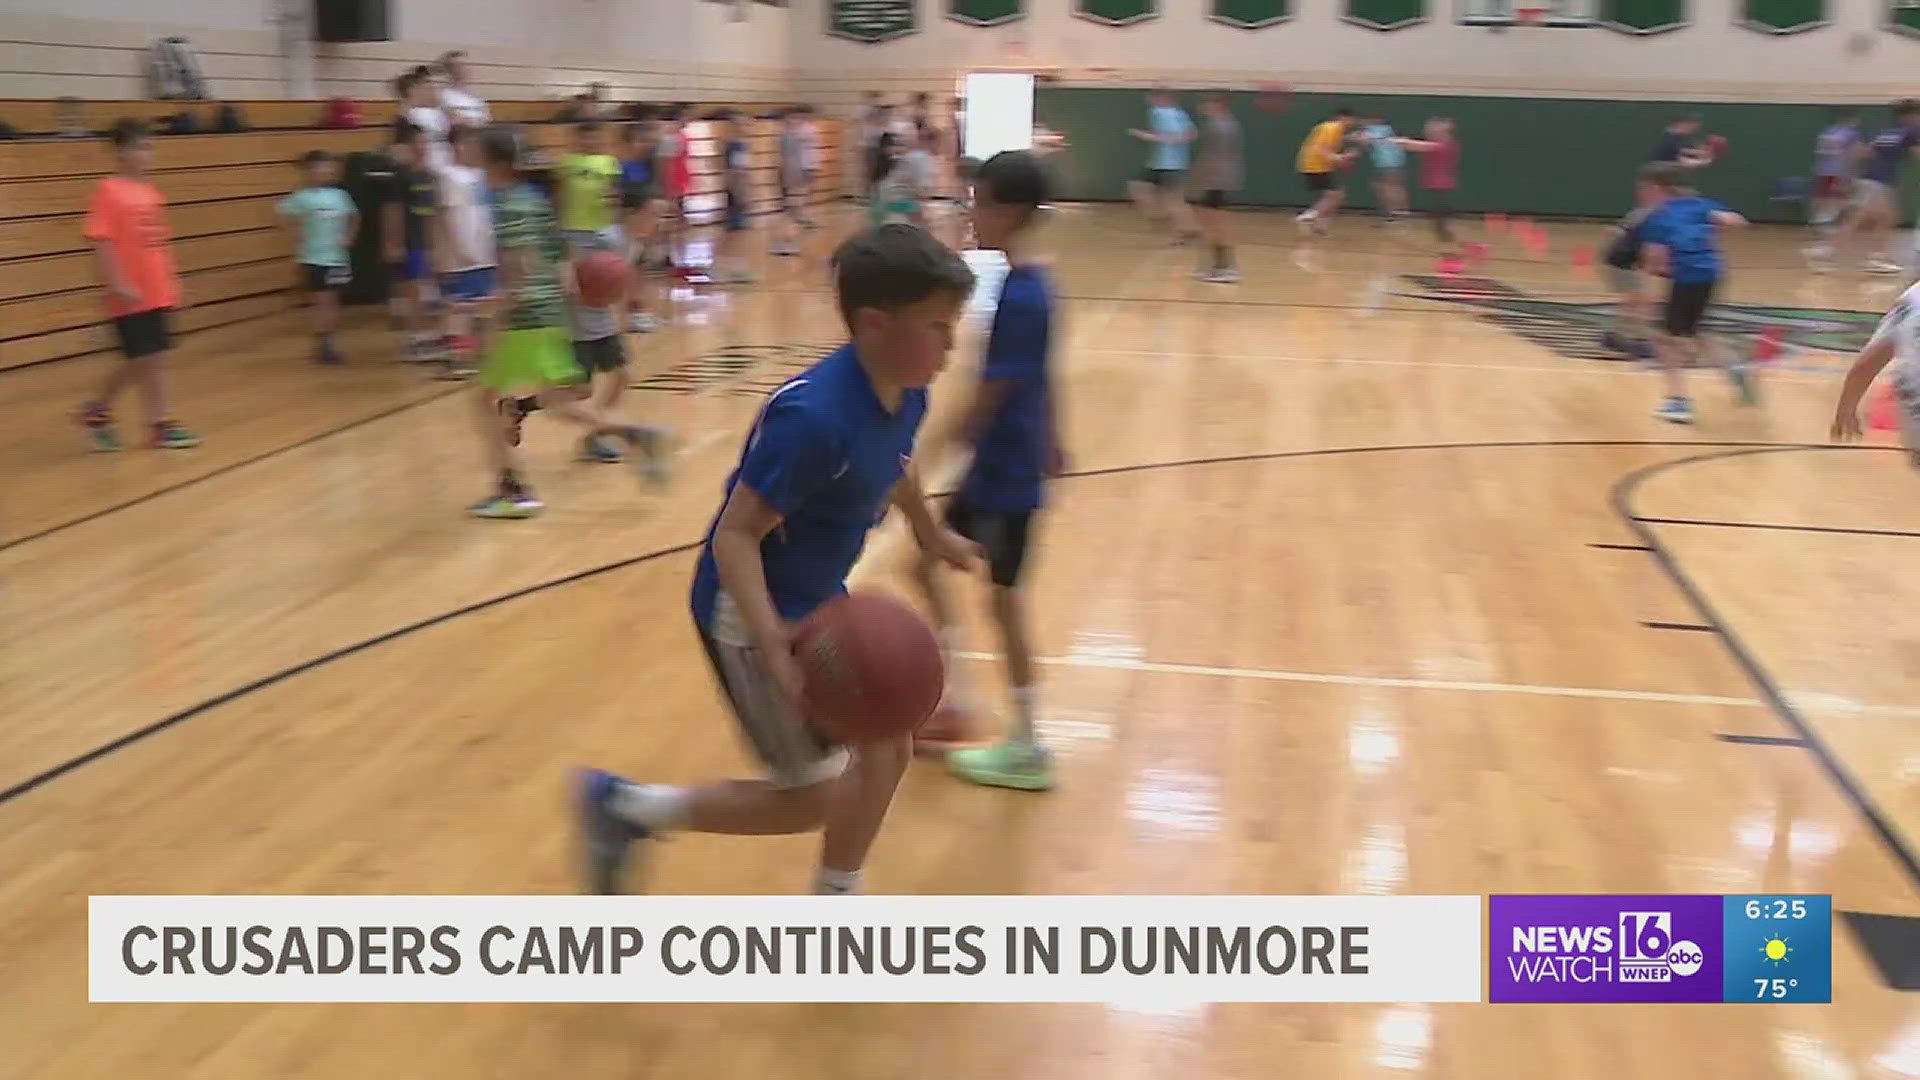 86 campers packed into the gym at Holy Cross High-School in Dunmore